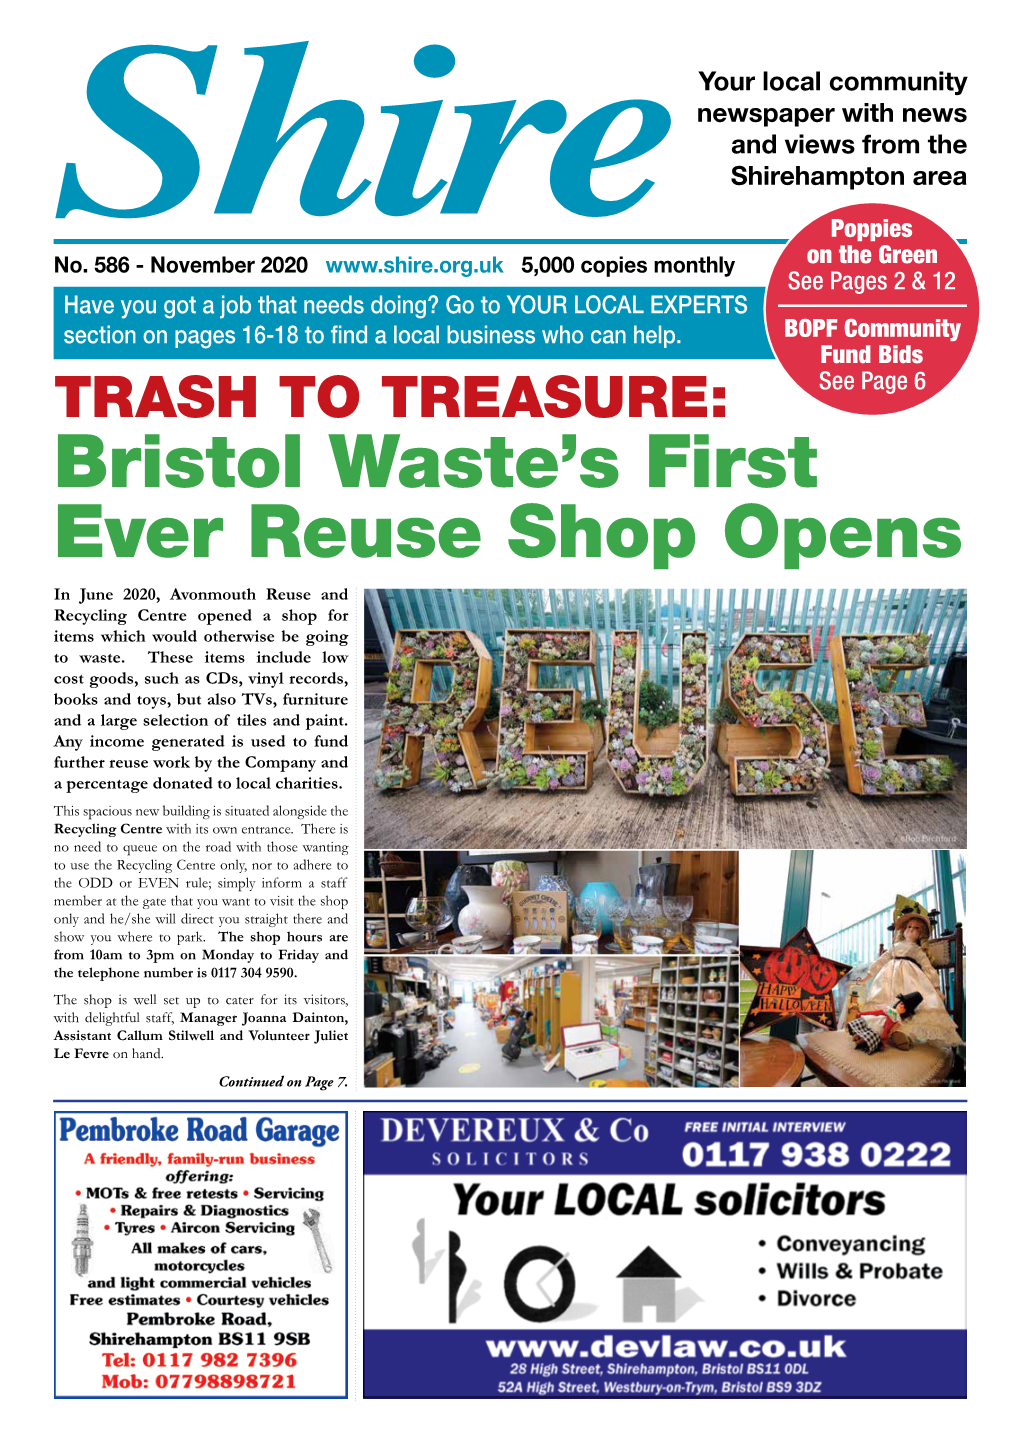 Bristol Waste's First Ever Reuse Shop Opens